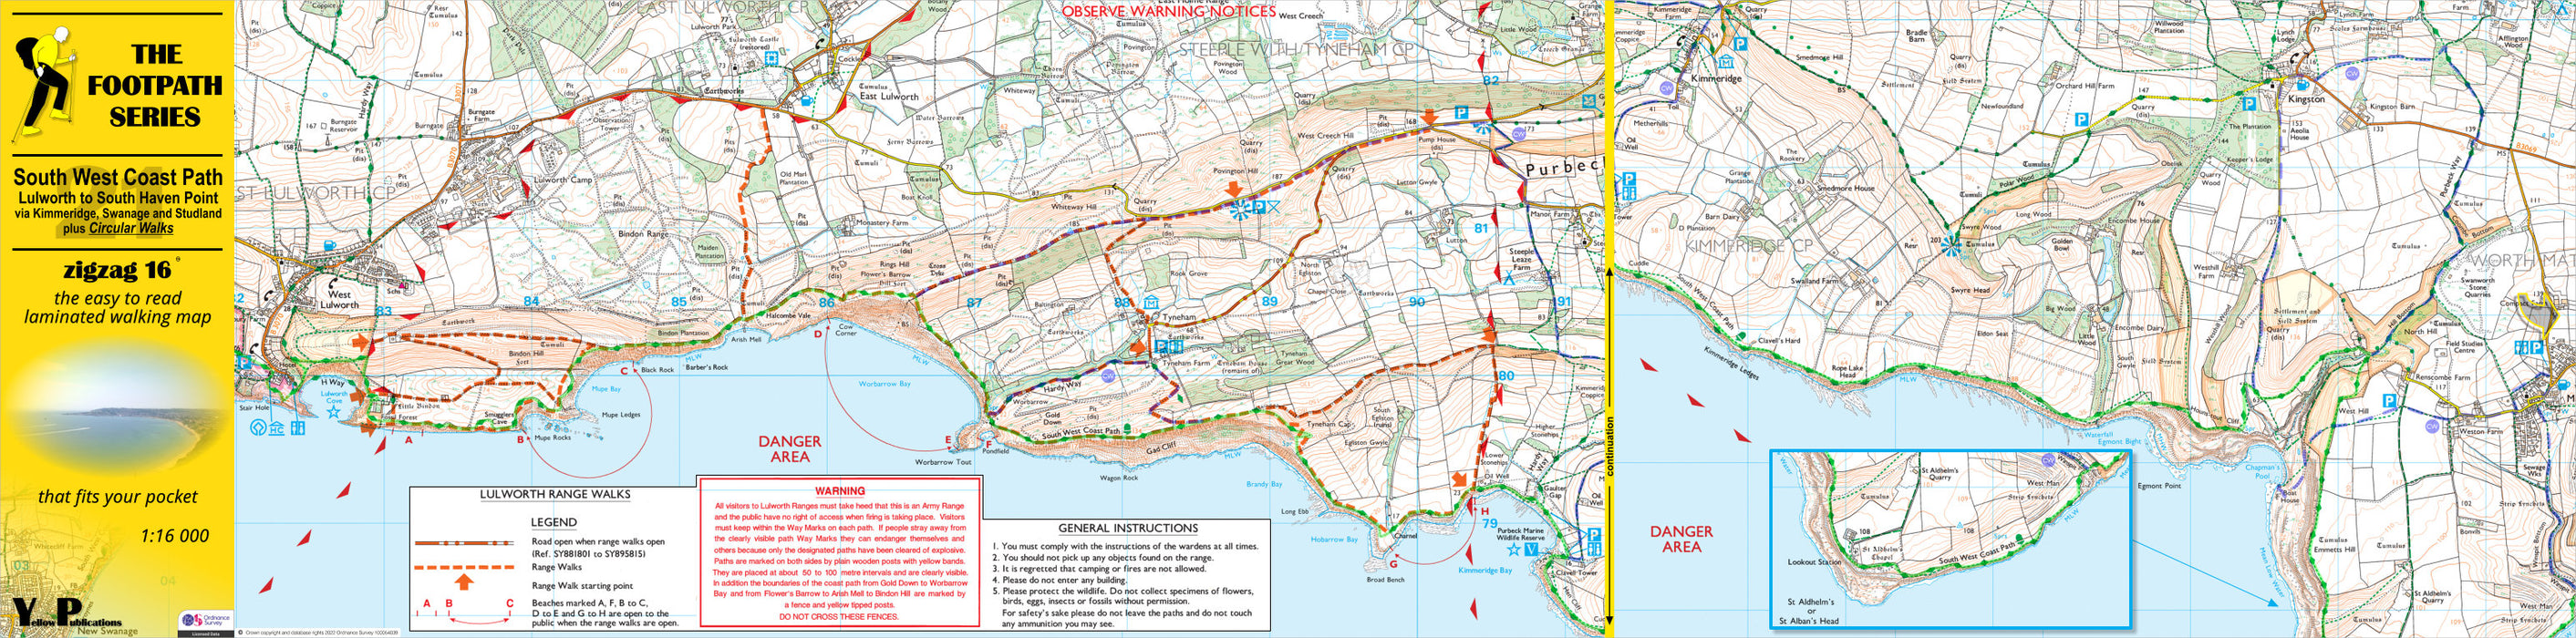 South West Coast Path easy-read map - zigzag 21 - Lulworth to South Haven Point inside front. The Trails Shop.